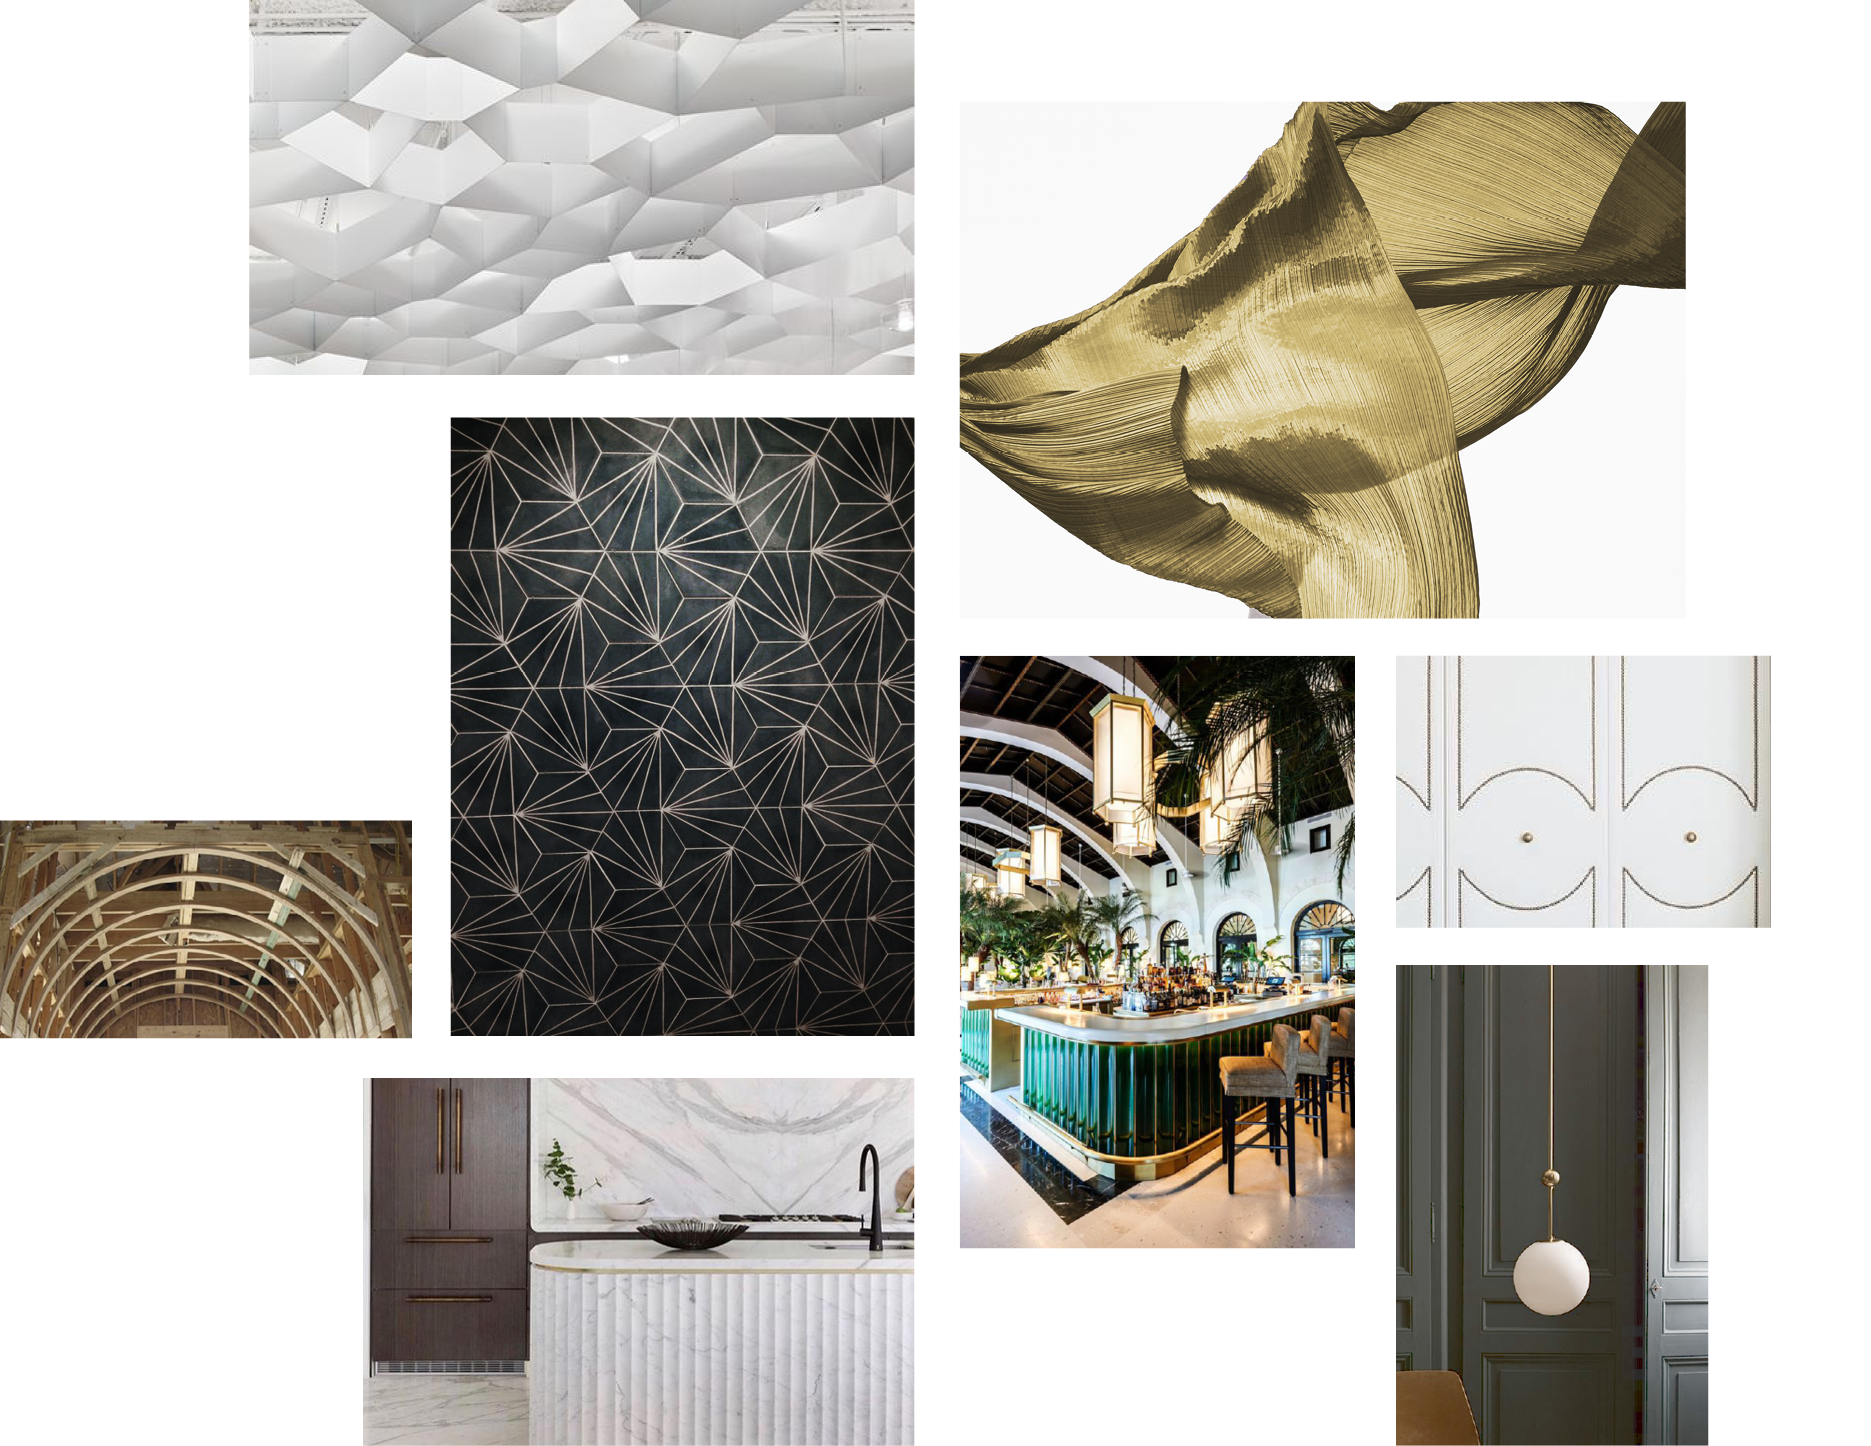 Collage of concepts that inspired DACCA Architecture's design of Club Marconi's function rooms.